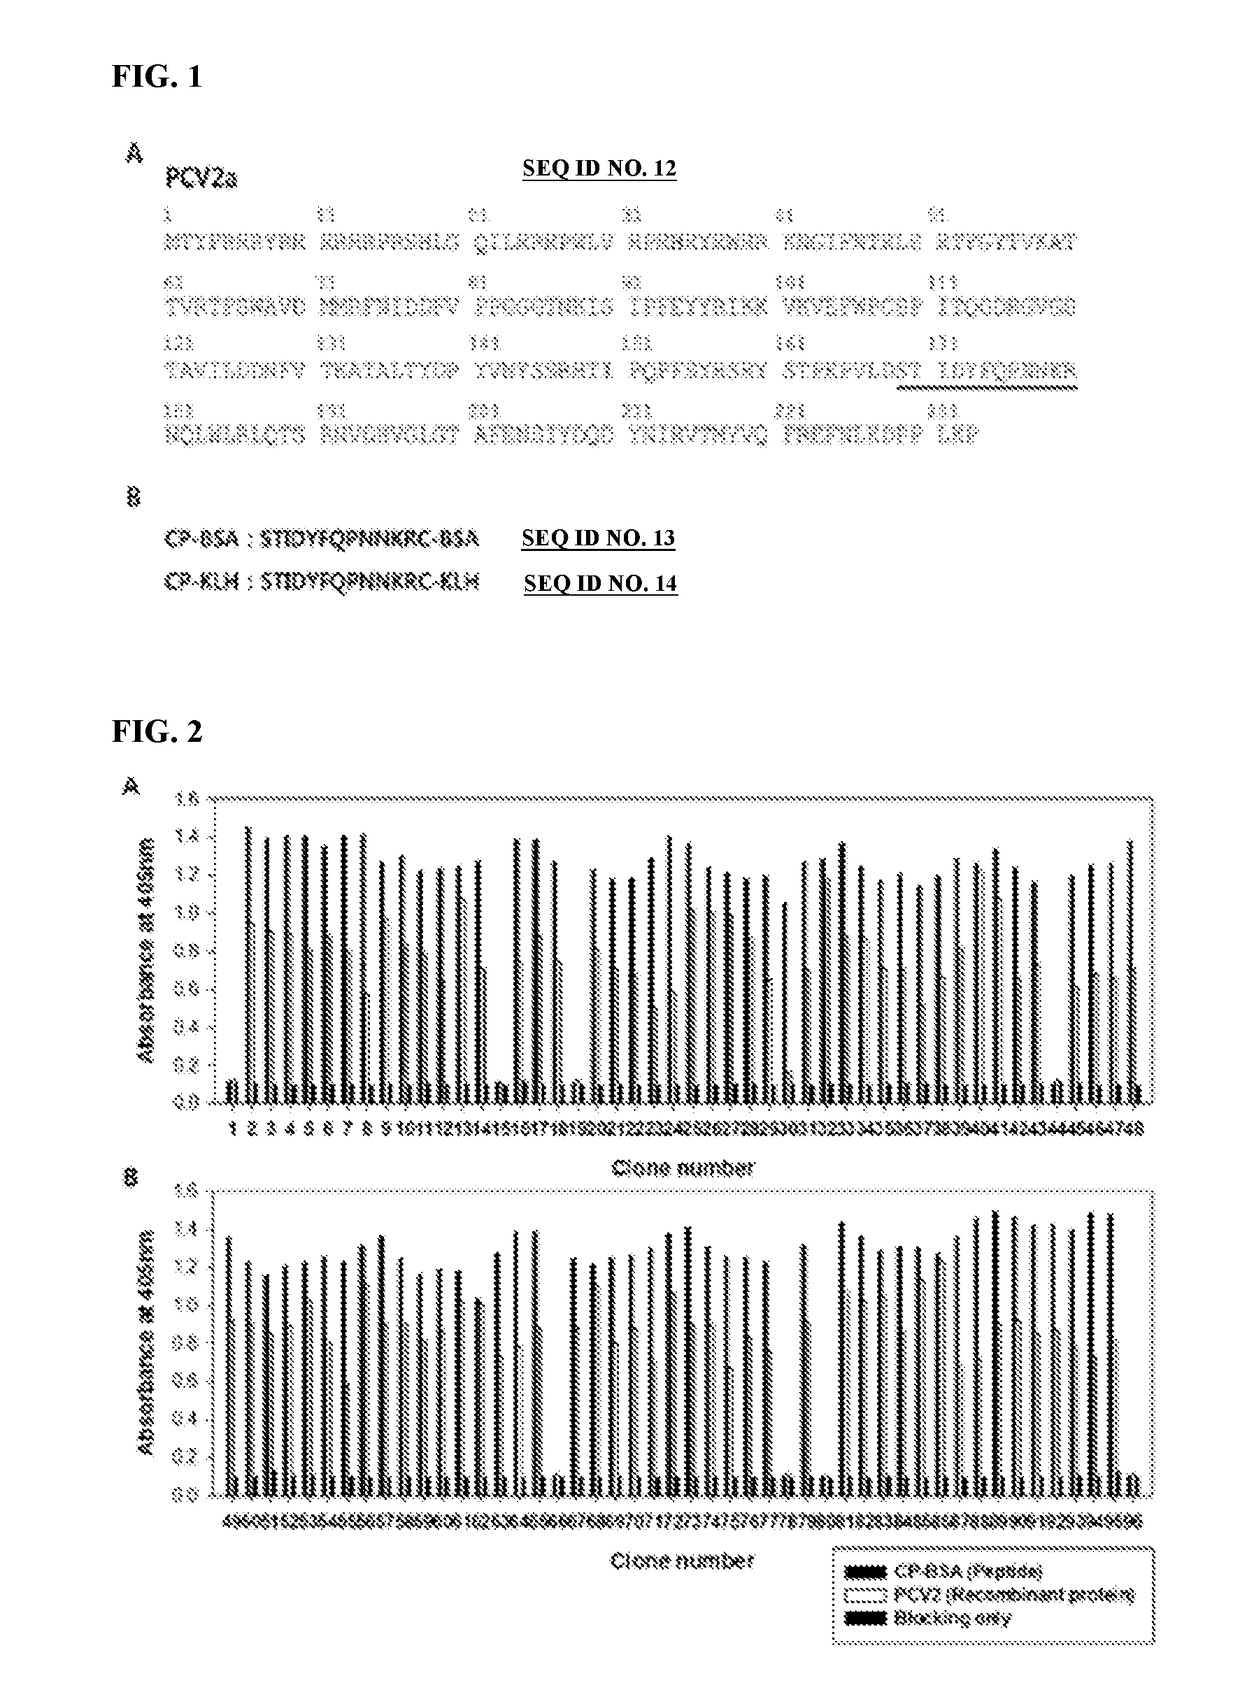 Monoclonal antibody specific to pcv2 and method for diagnosing pmws using same